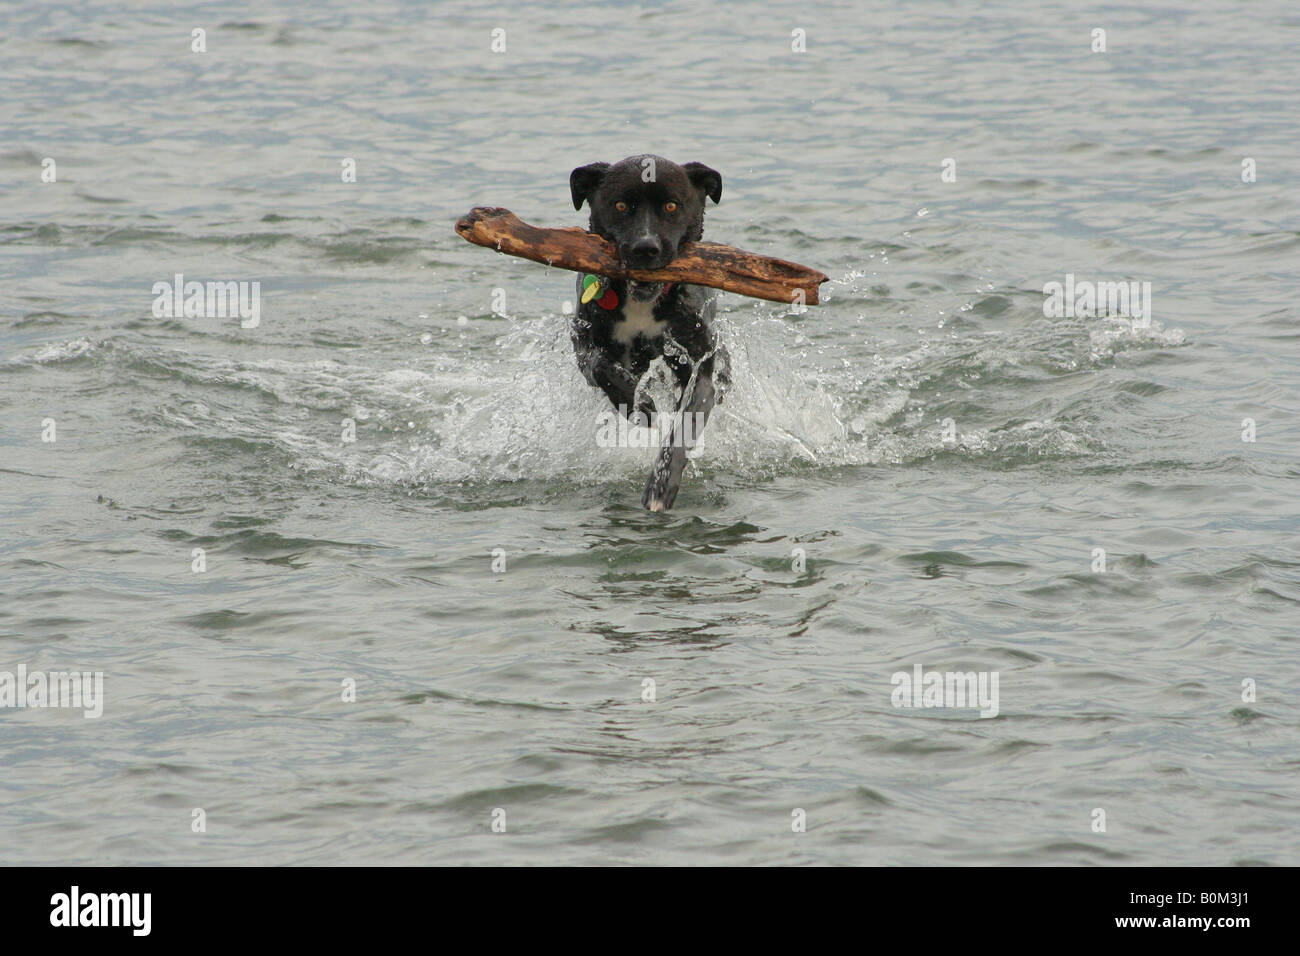 Black labrador dog bounding through the water with a stick in its mouth. Stock Photo